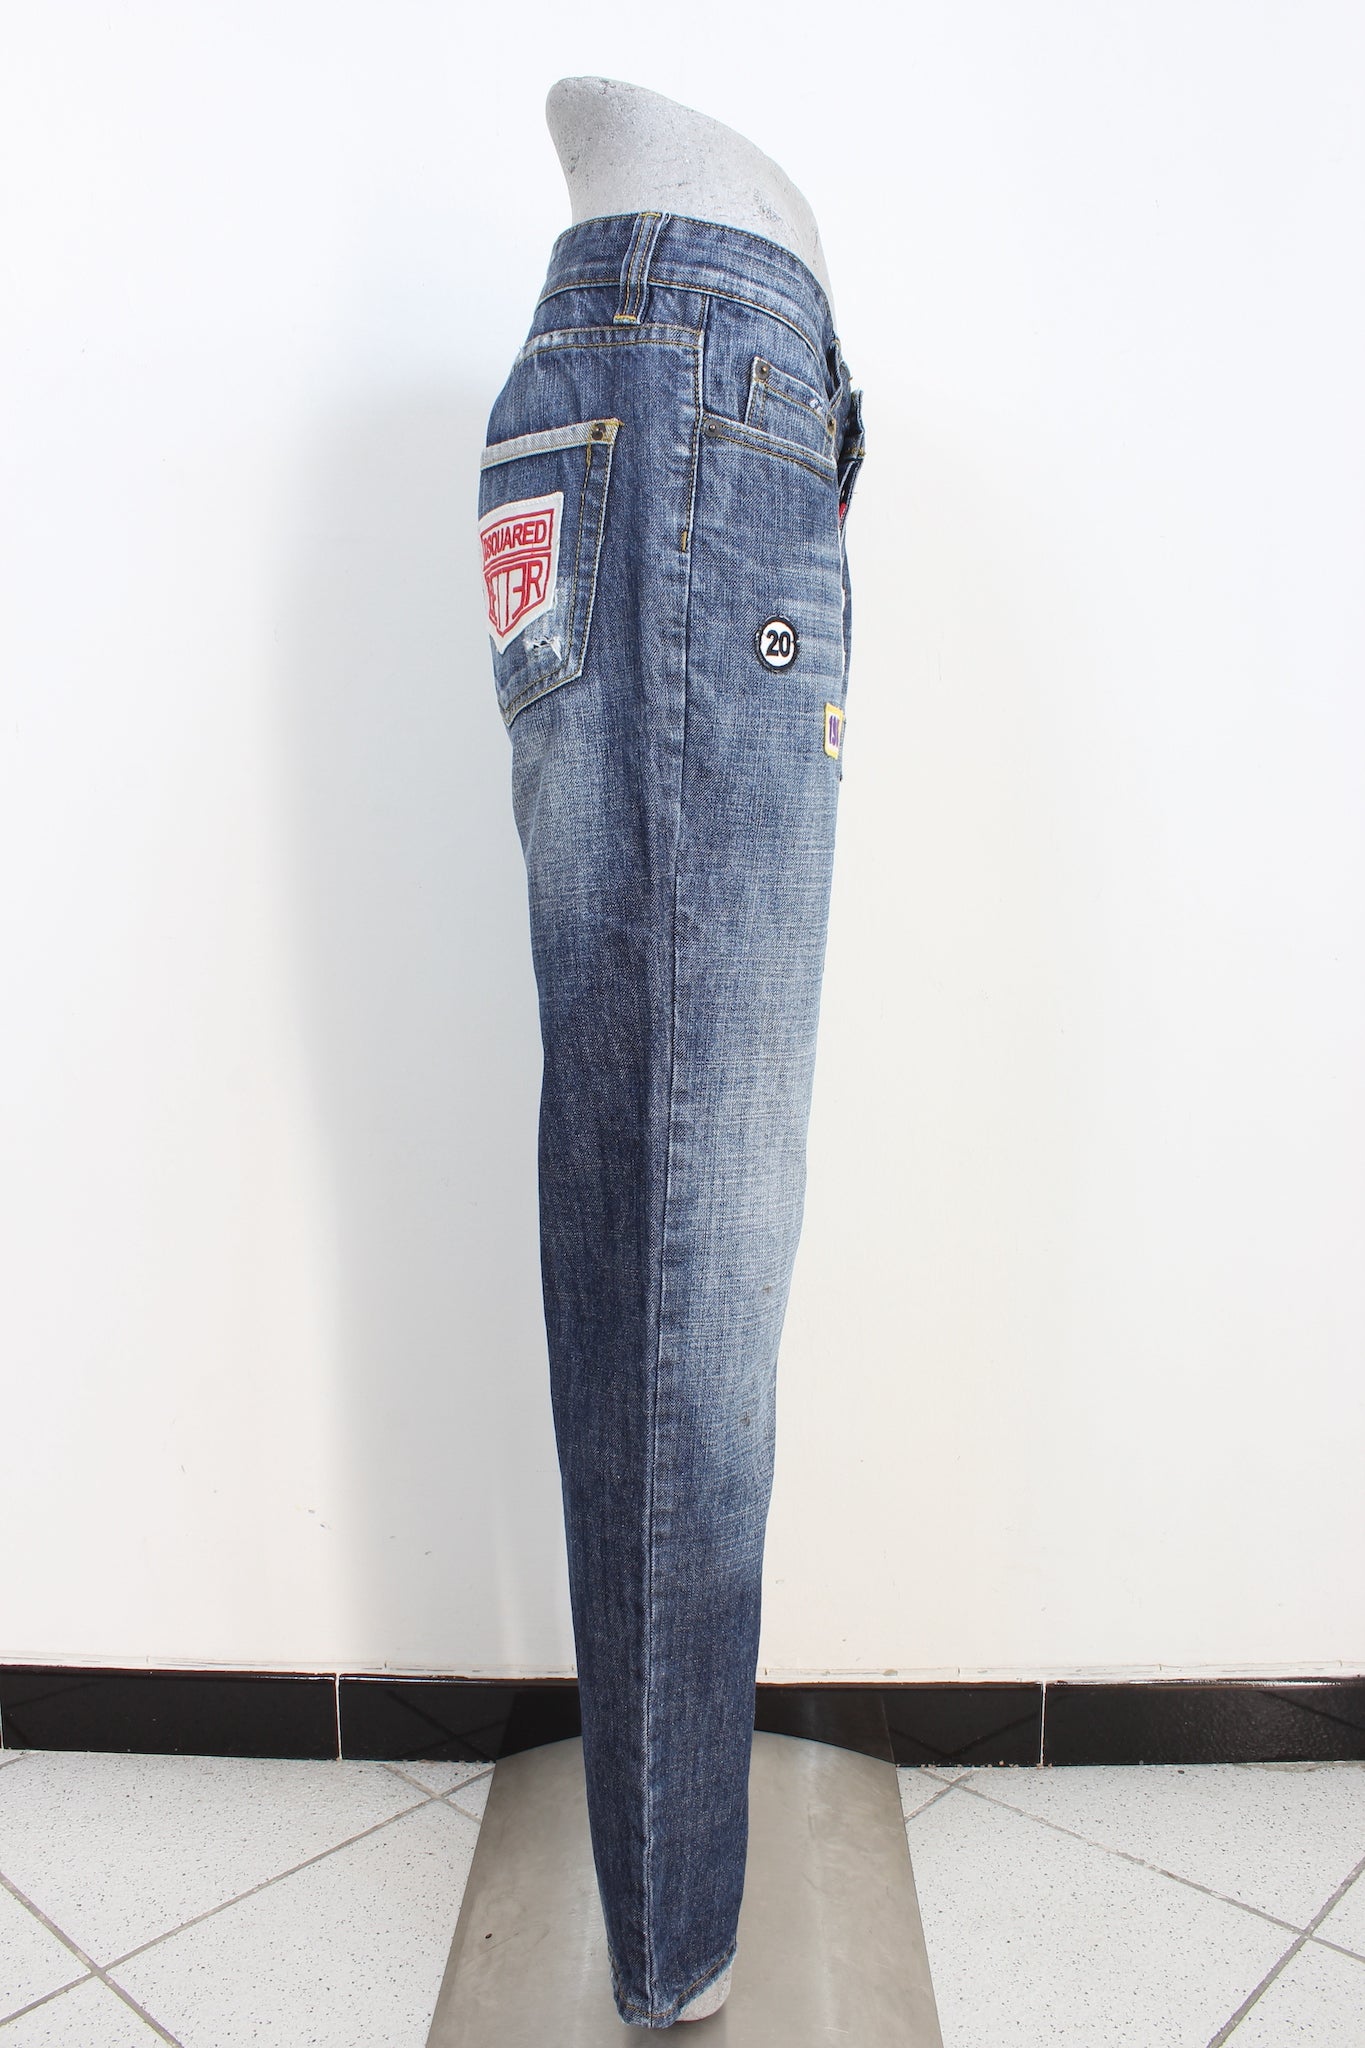 Dsquared Blue Straight Jeans 2000s